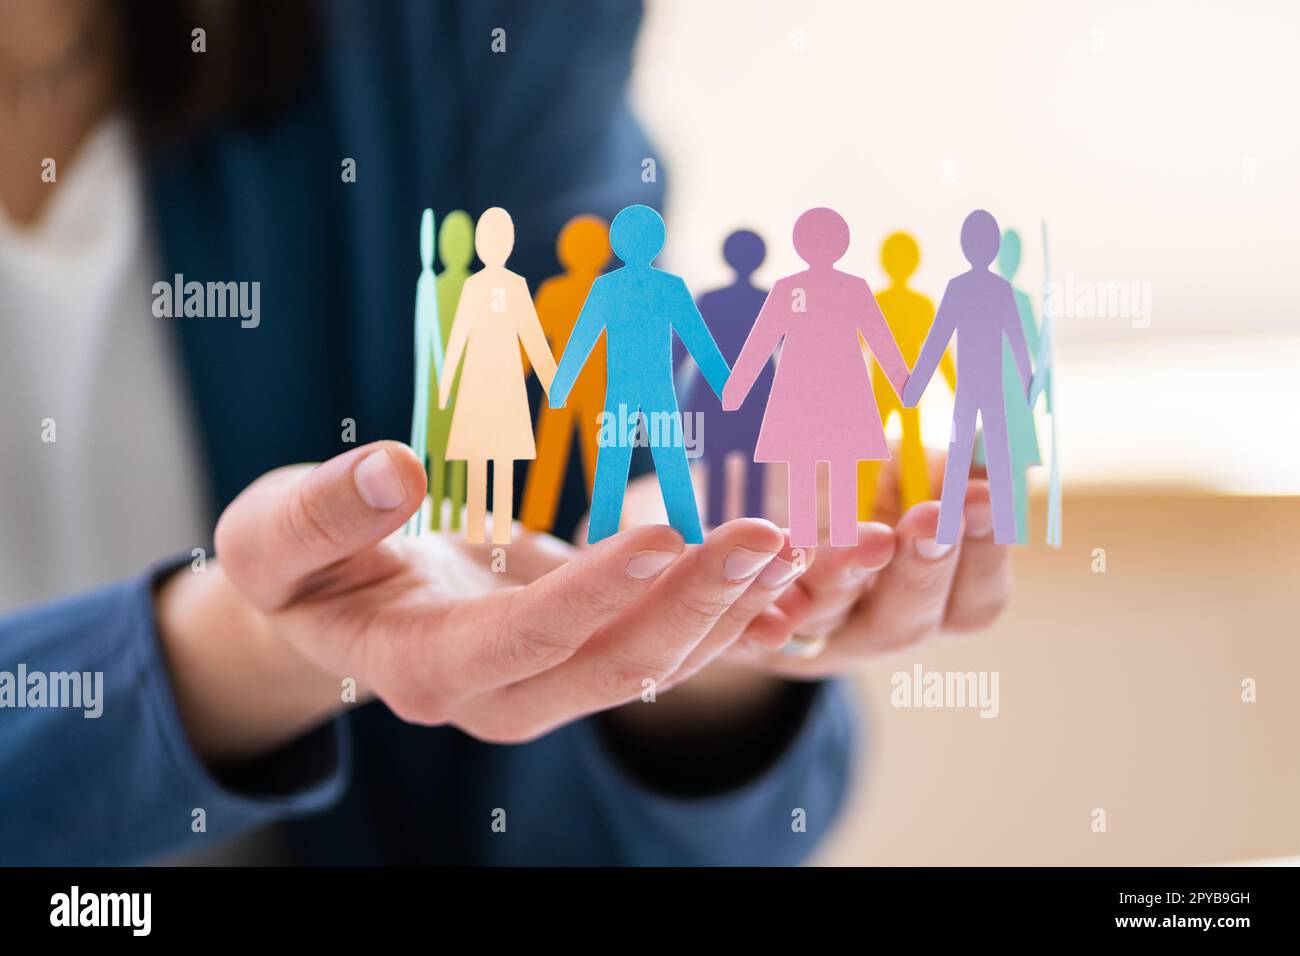 Diversity And Inclusion. Business Employment Leadership Stock Photo